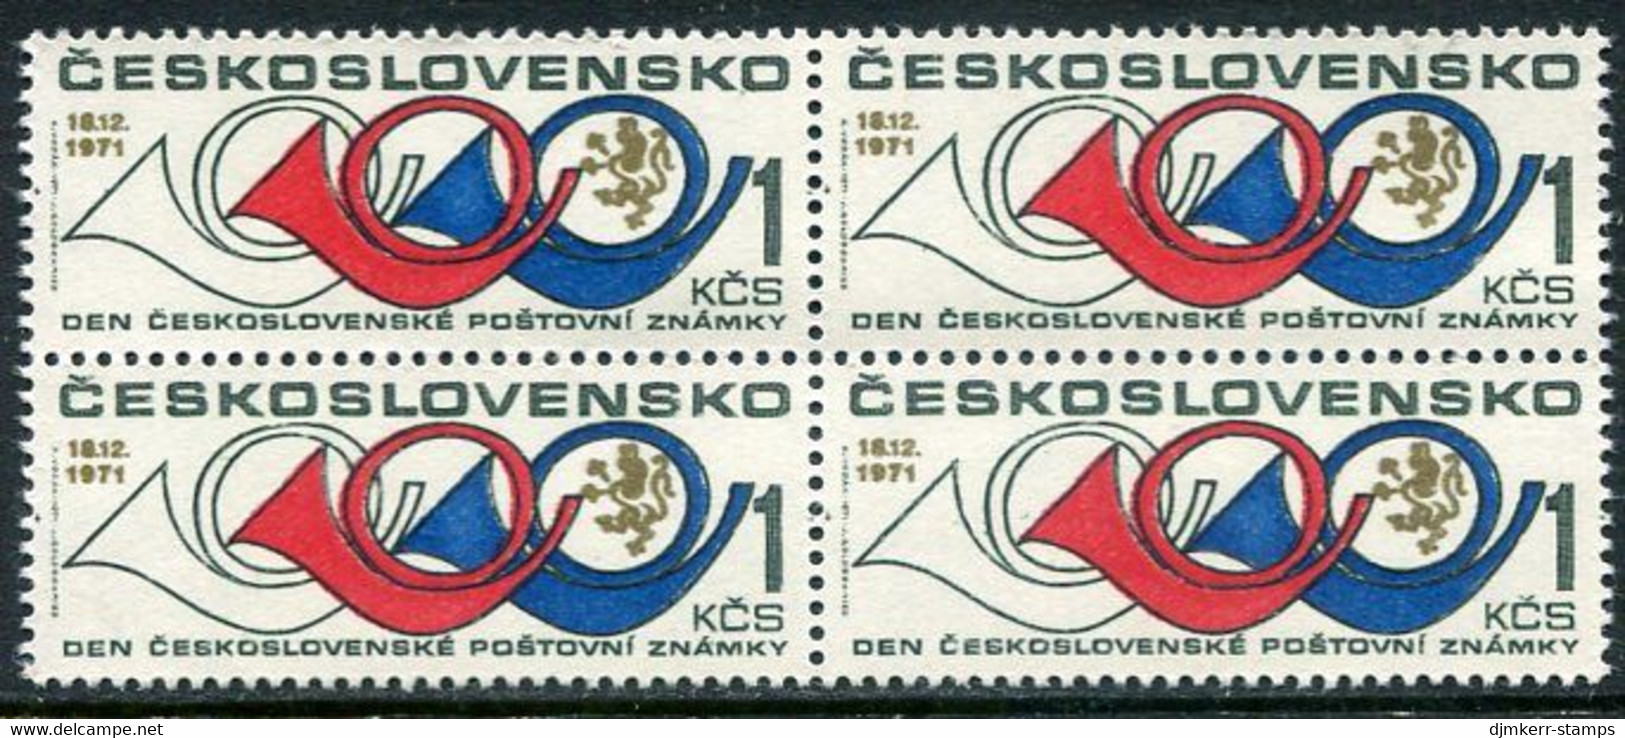 CZECHOSLOVAKIA 1971 Stamp Day Block F 4 MNH / **  Michel 2049 - Unused Stamps